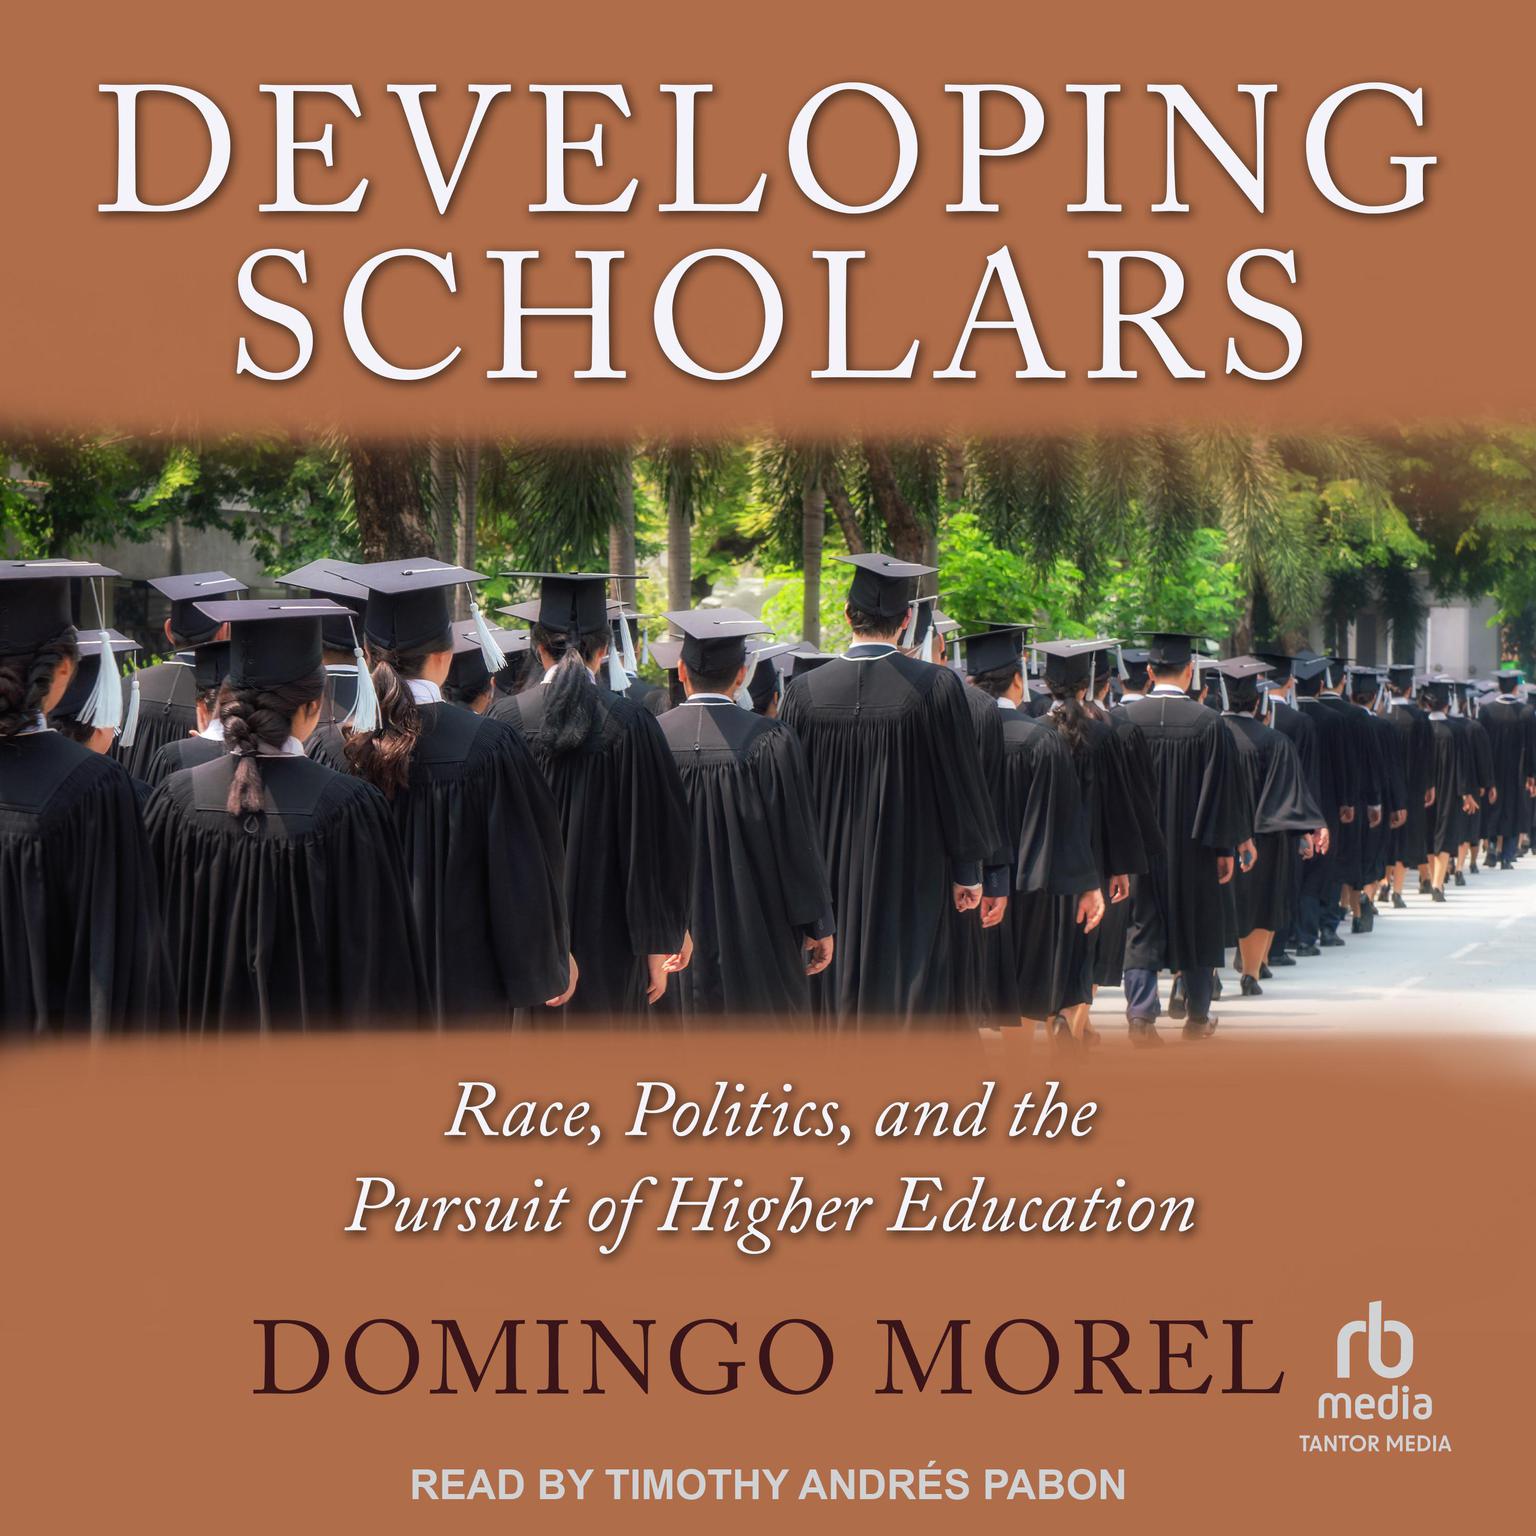 Developing Scholars: Race, Politics, and the Pursuit of Higher Education Audiobook, by Domingo Morel